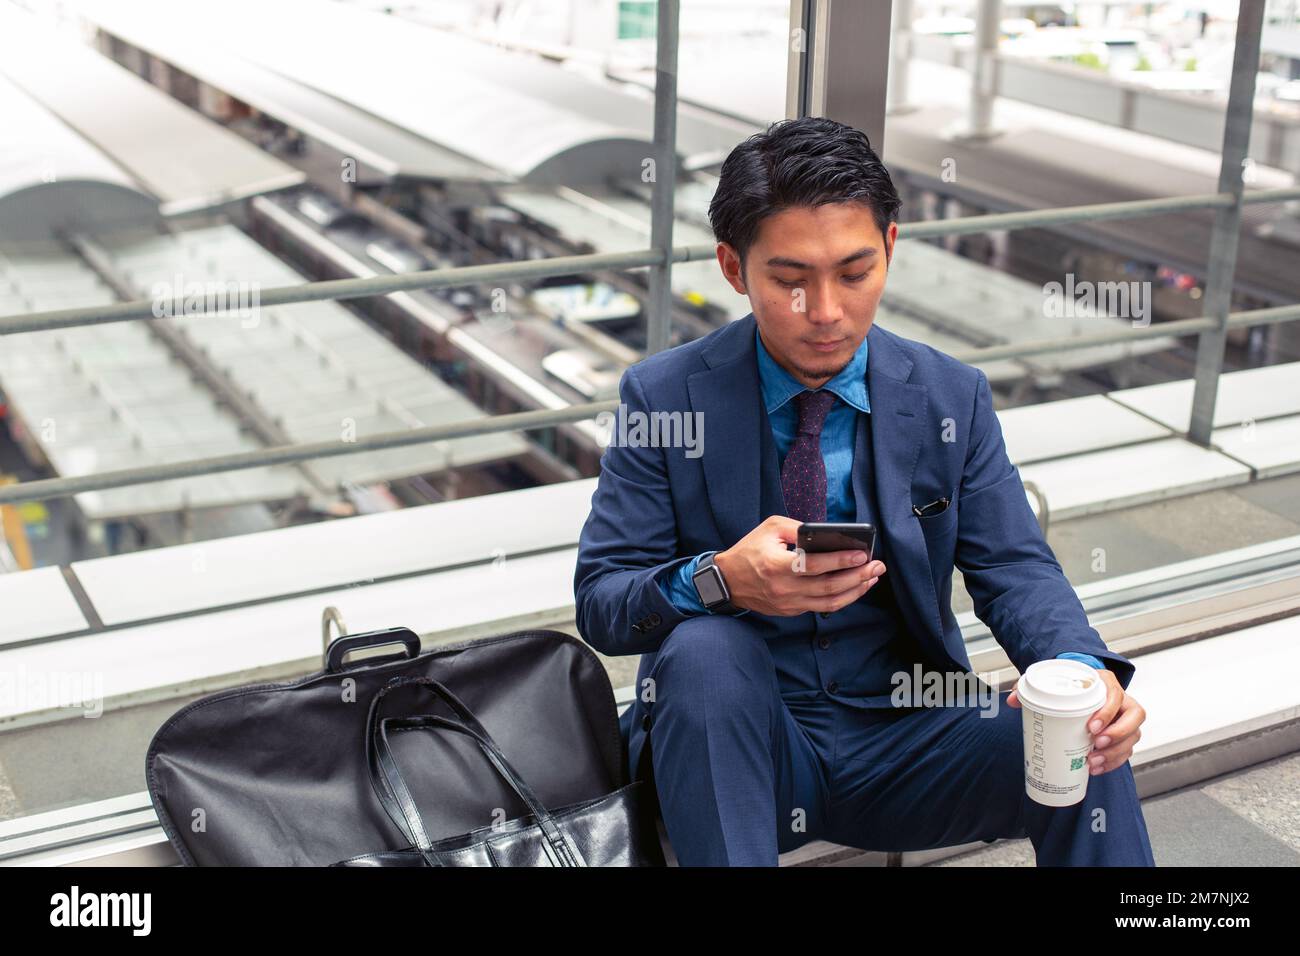 A young businessman in a blue suit in a city, looking at his mobile phone screen, texting or reading a message. Stock Photo